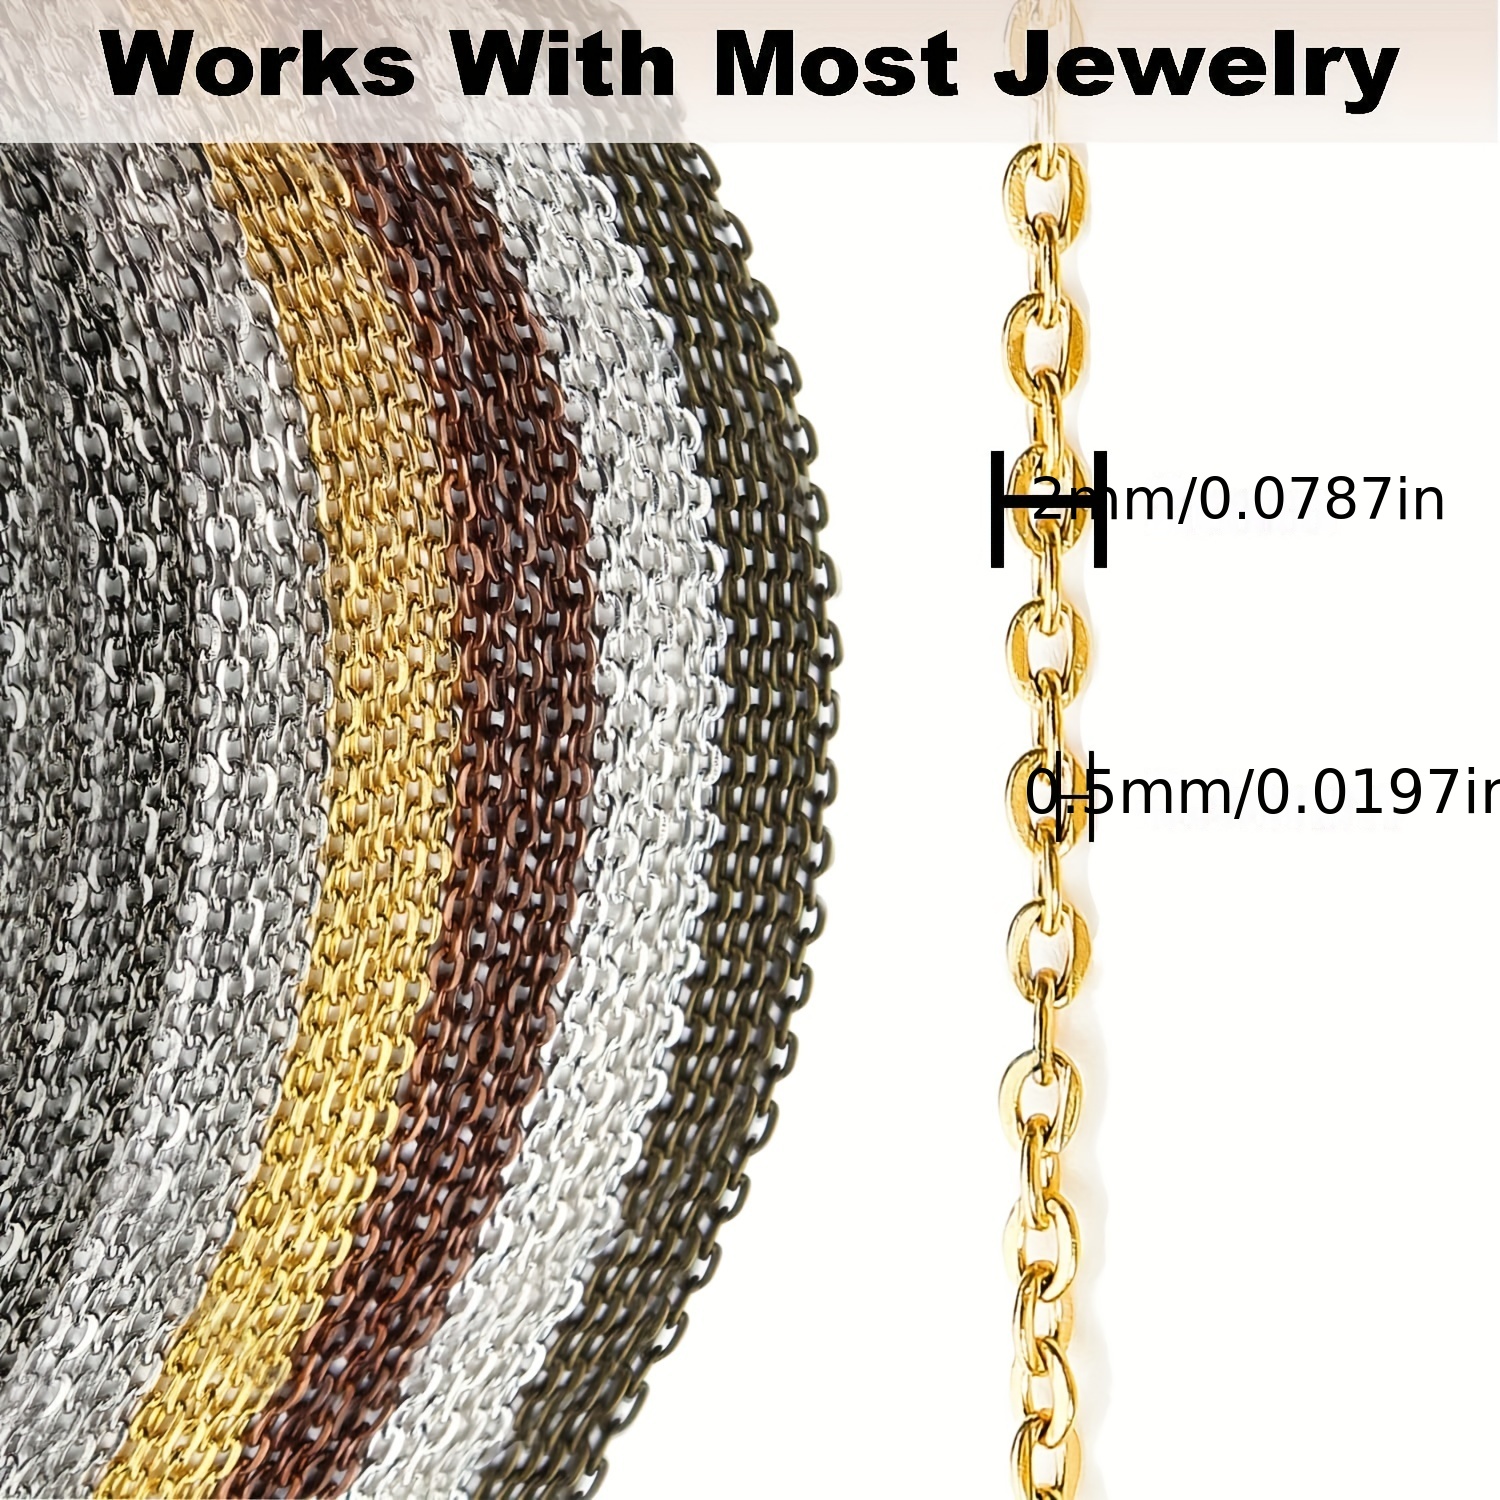  selizo Chains for Jewelry Making, 60ft Jewelry Making